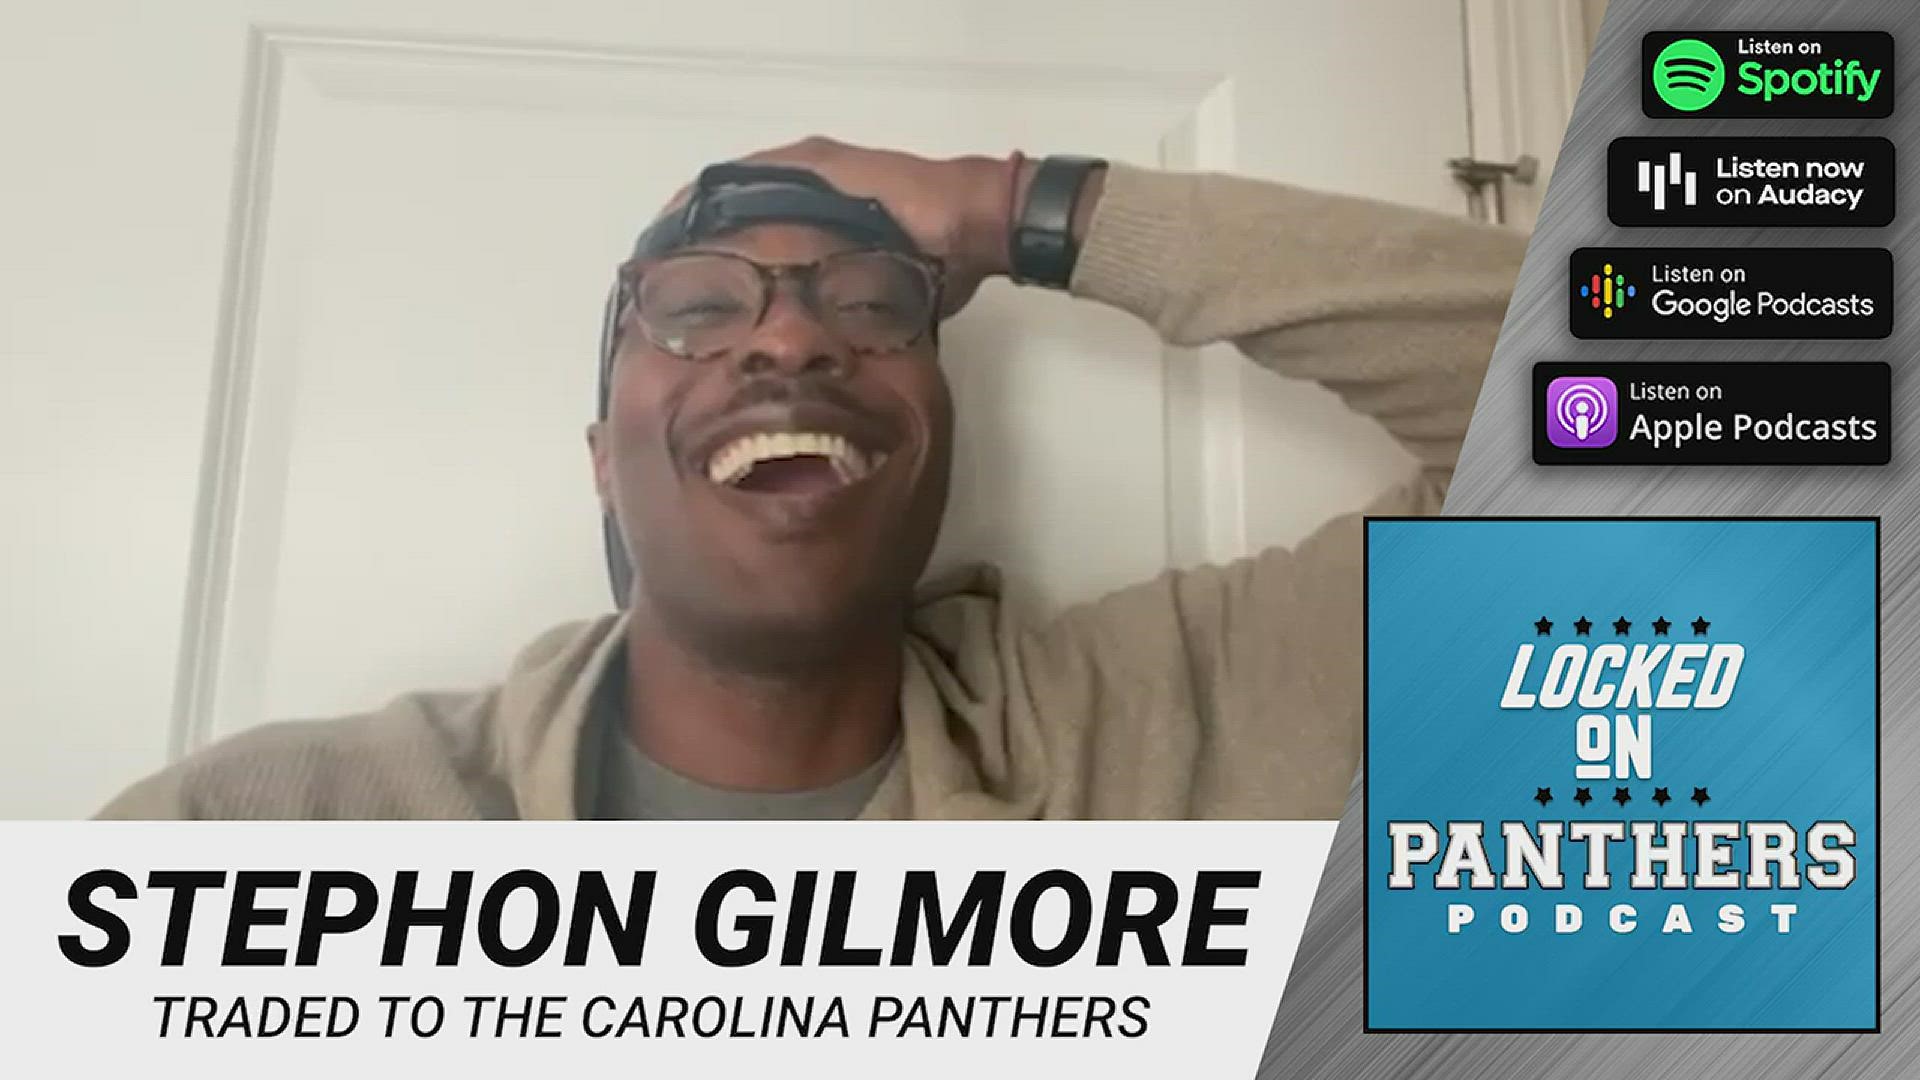 The Carolina Panthers traded a sixth-round pick in the 2023 NFL Draft to the New England Patriots for 2019 Defensive Player of the Year Stephon Gilmore.